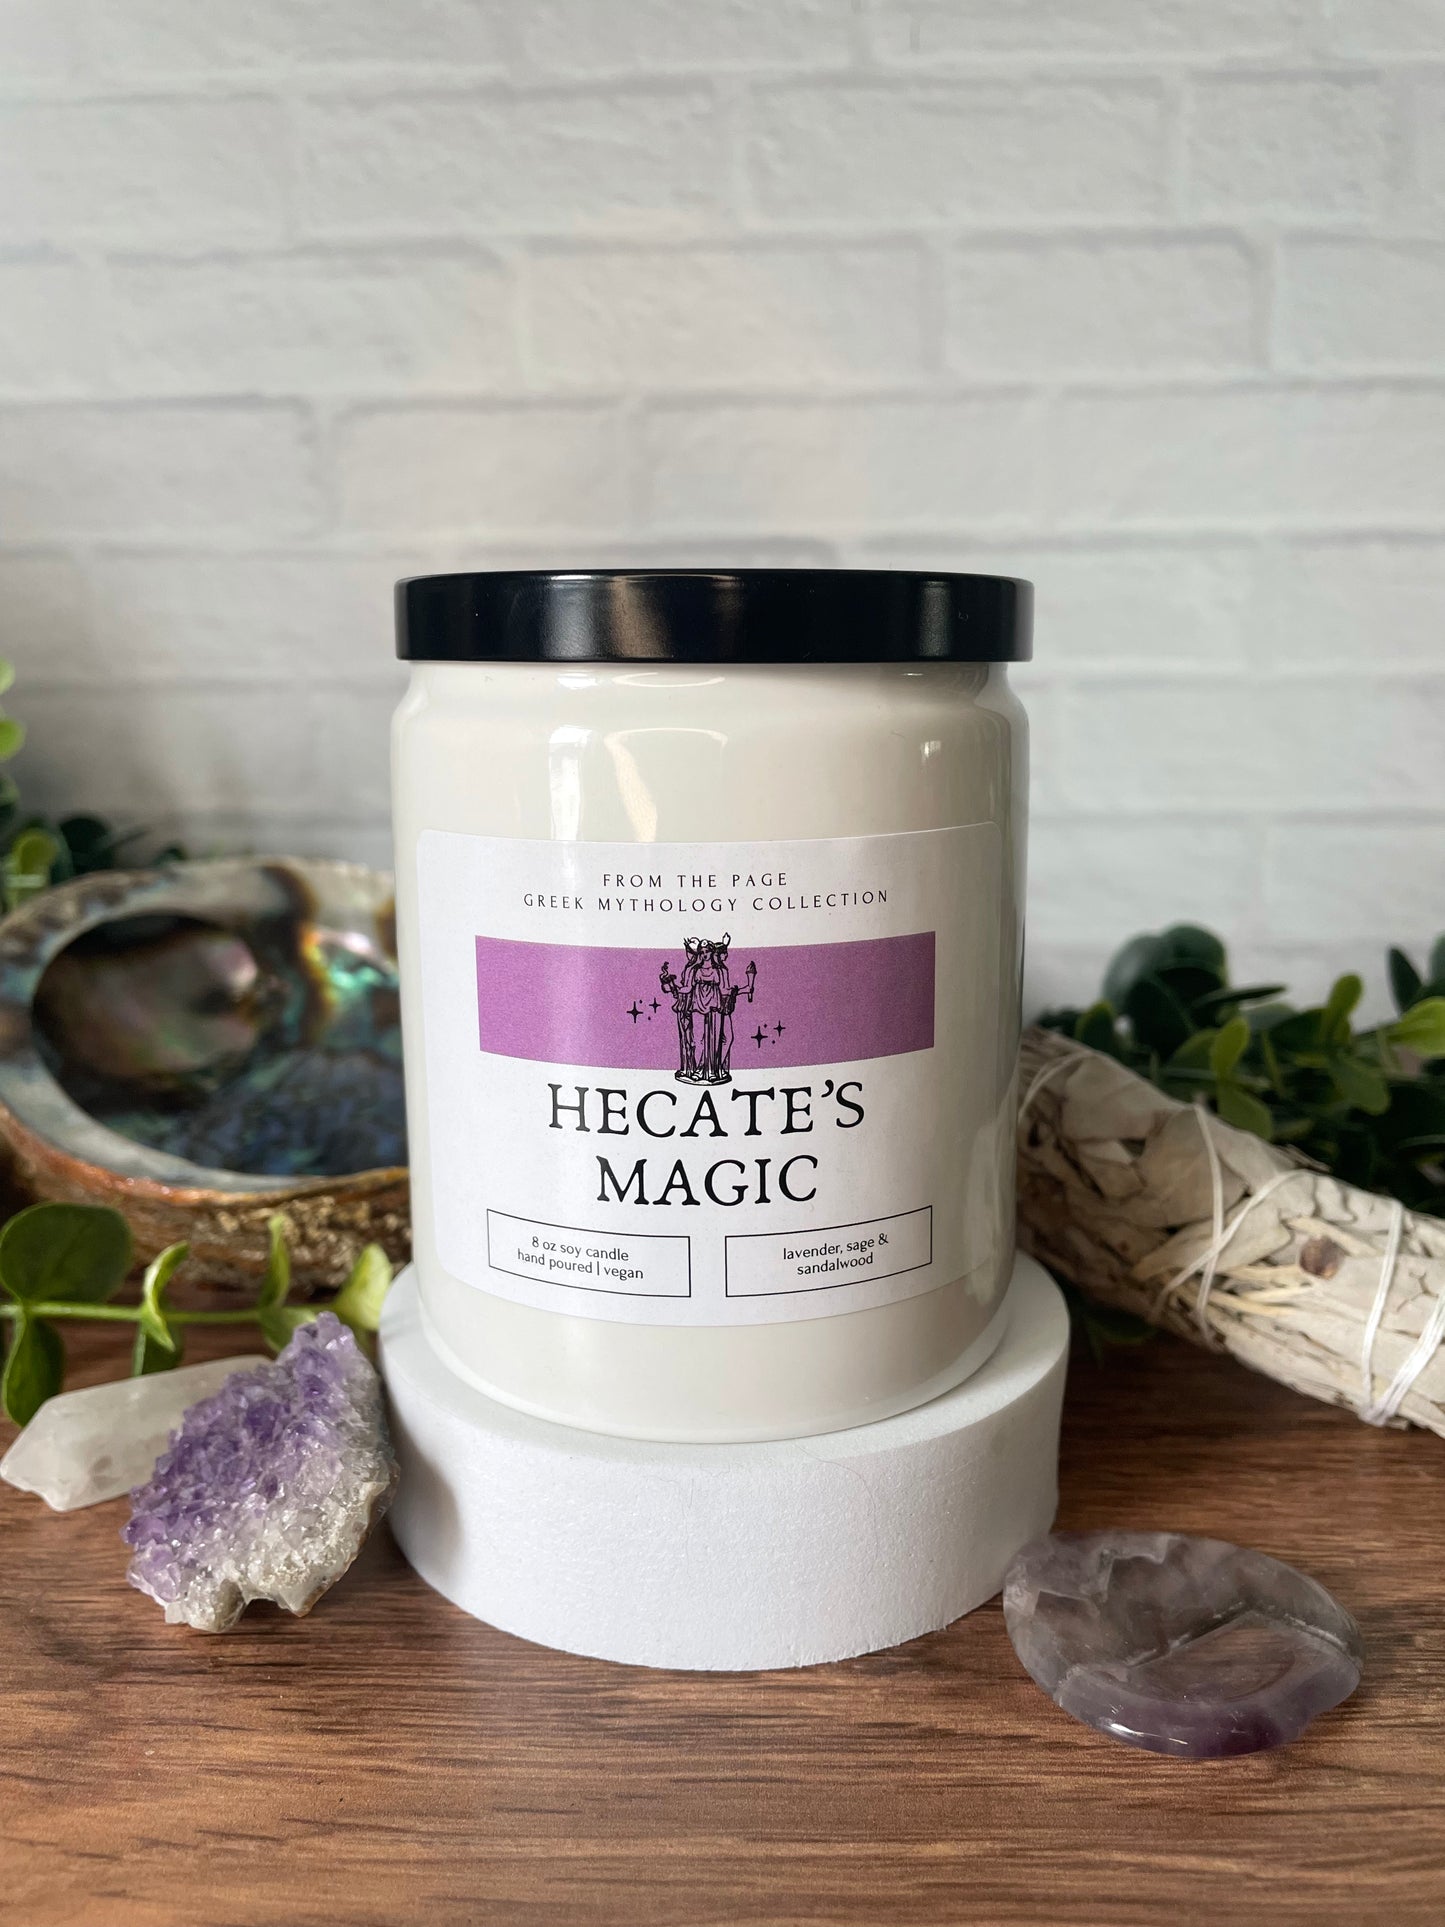 Hecate's Magic